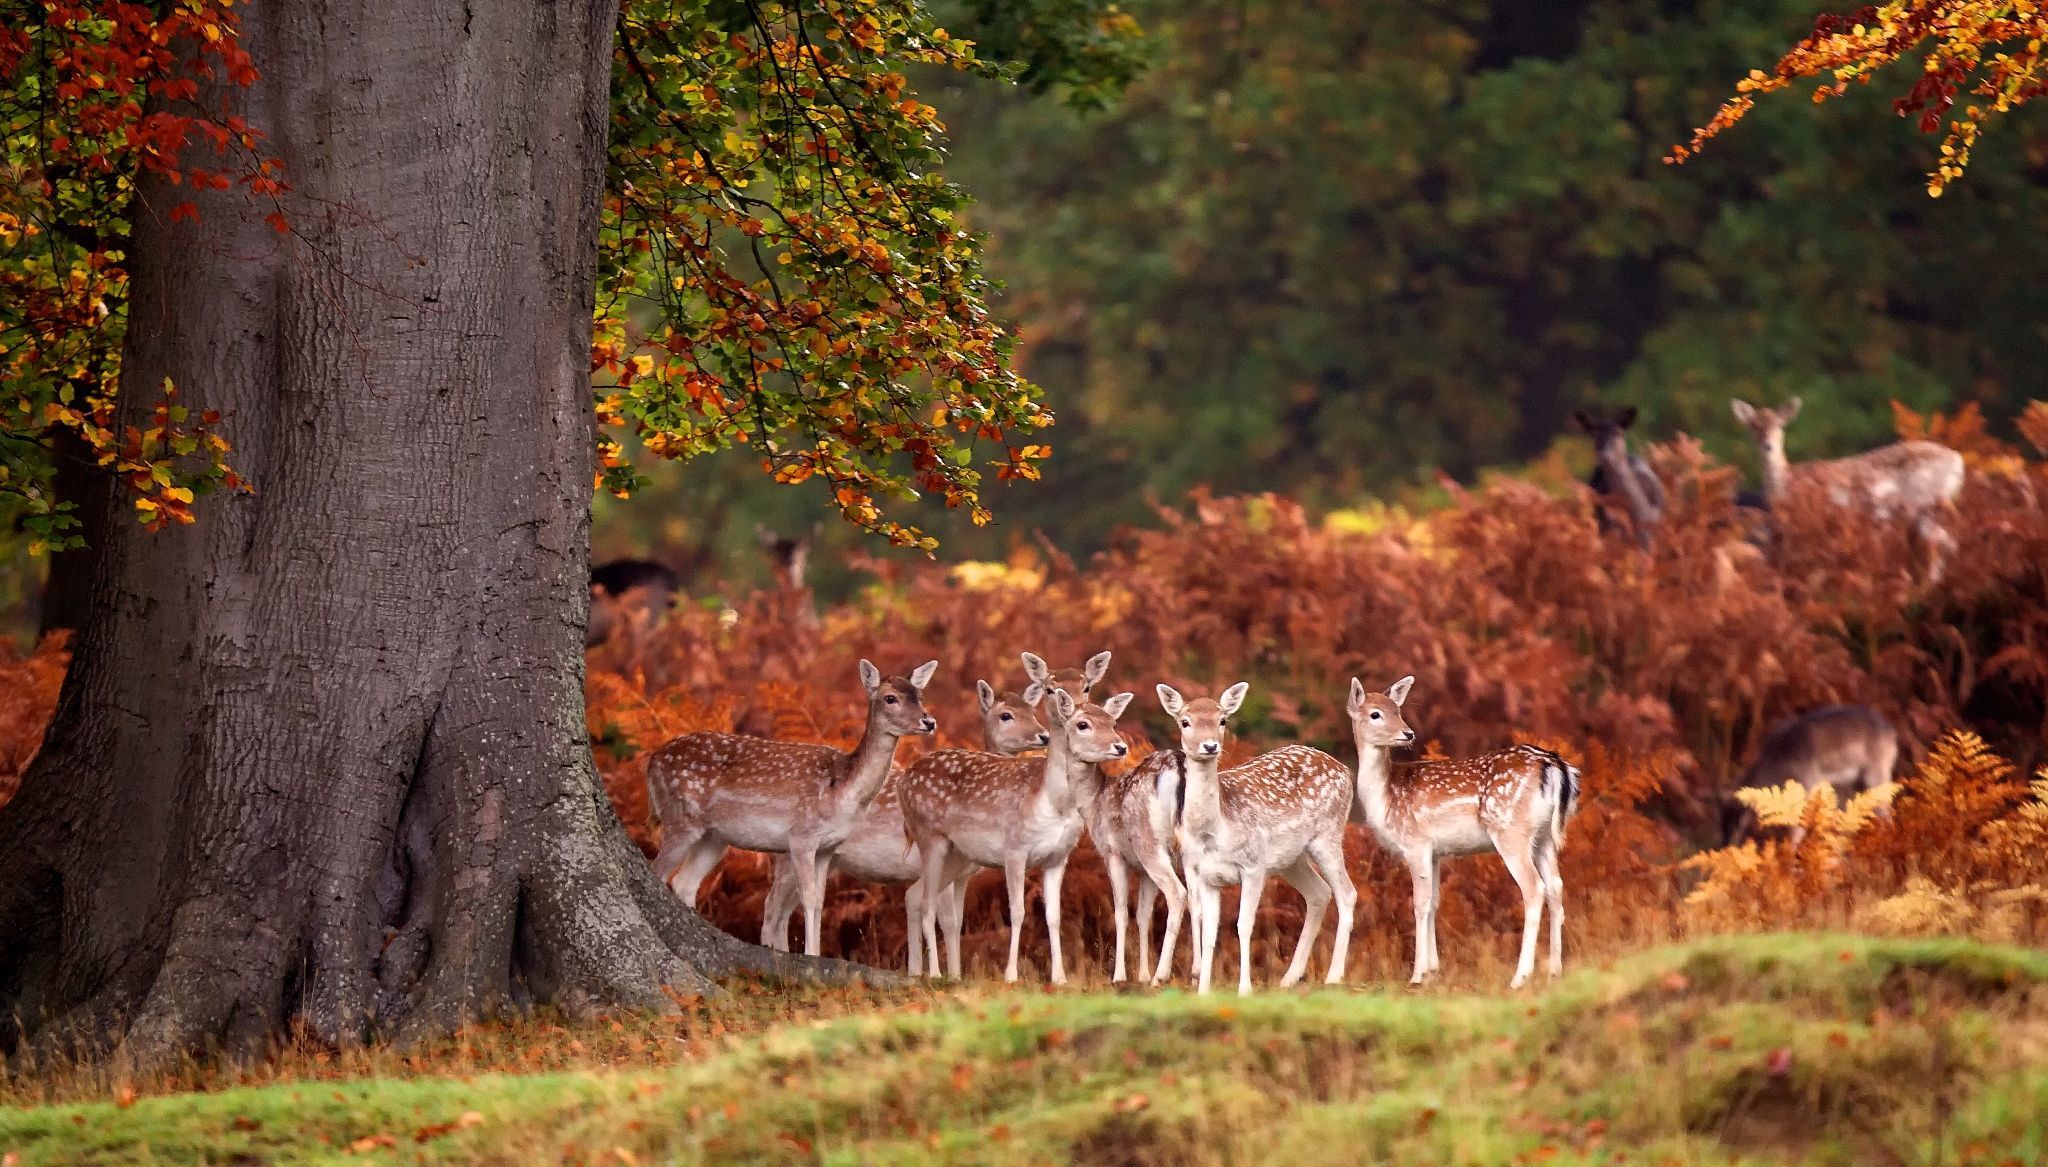 Awesome Animals Out And About This Autumn. Deer photography, Deer wallpaper, Autumn animals